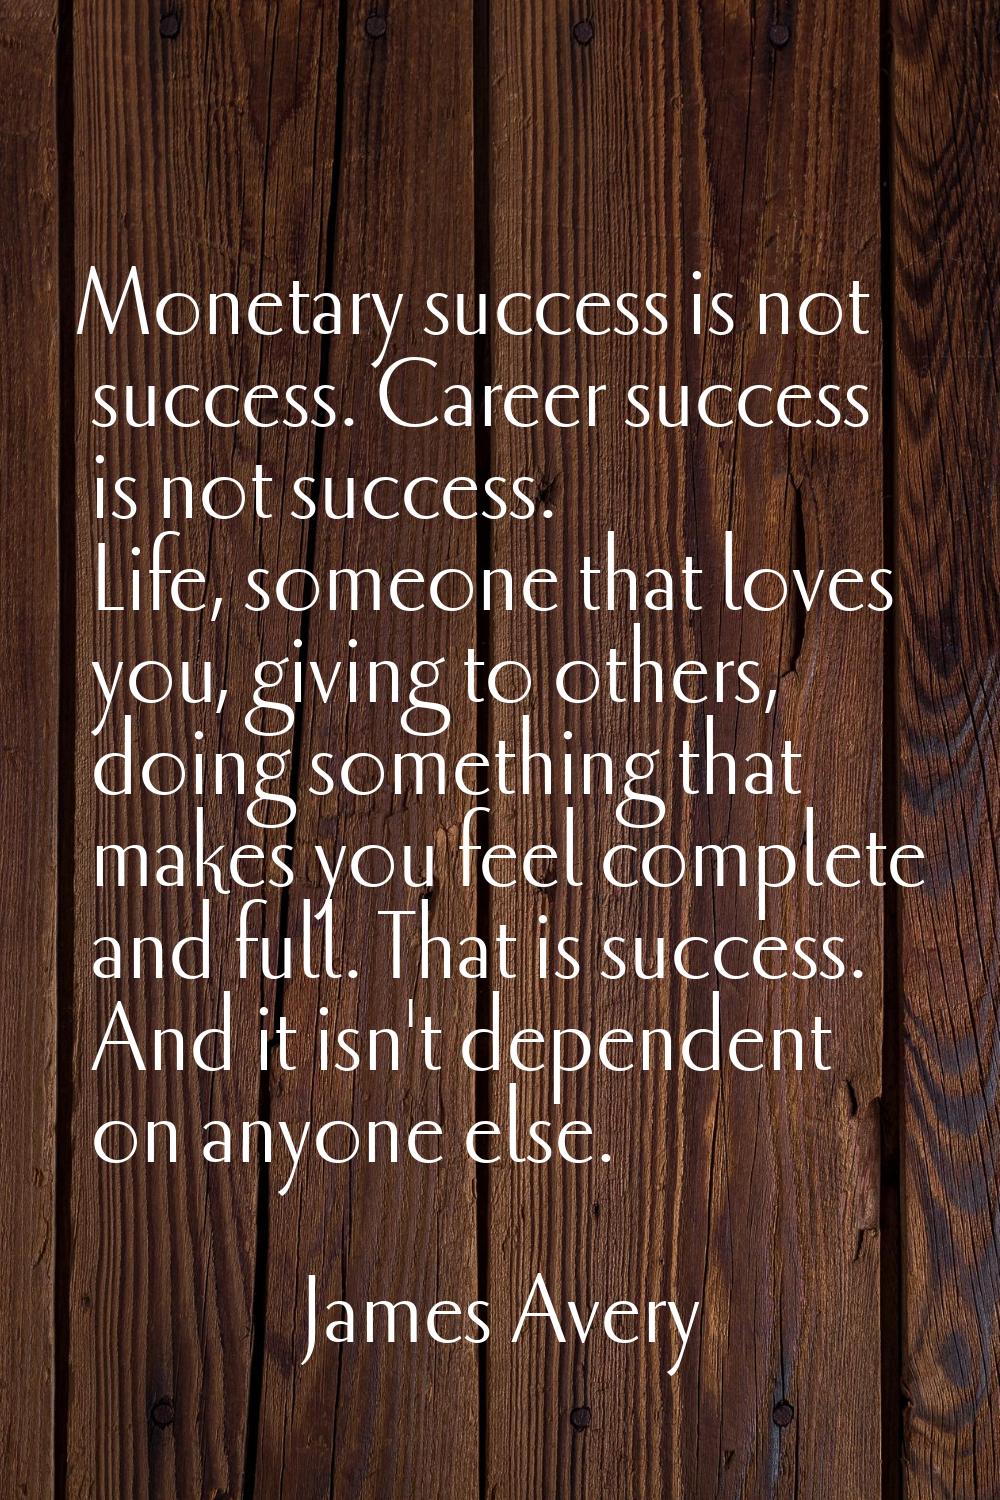 Monetary success is not success. Career success is not success. Life, someone that loves you, givin